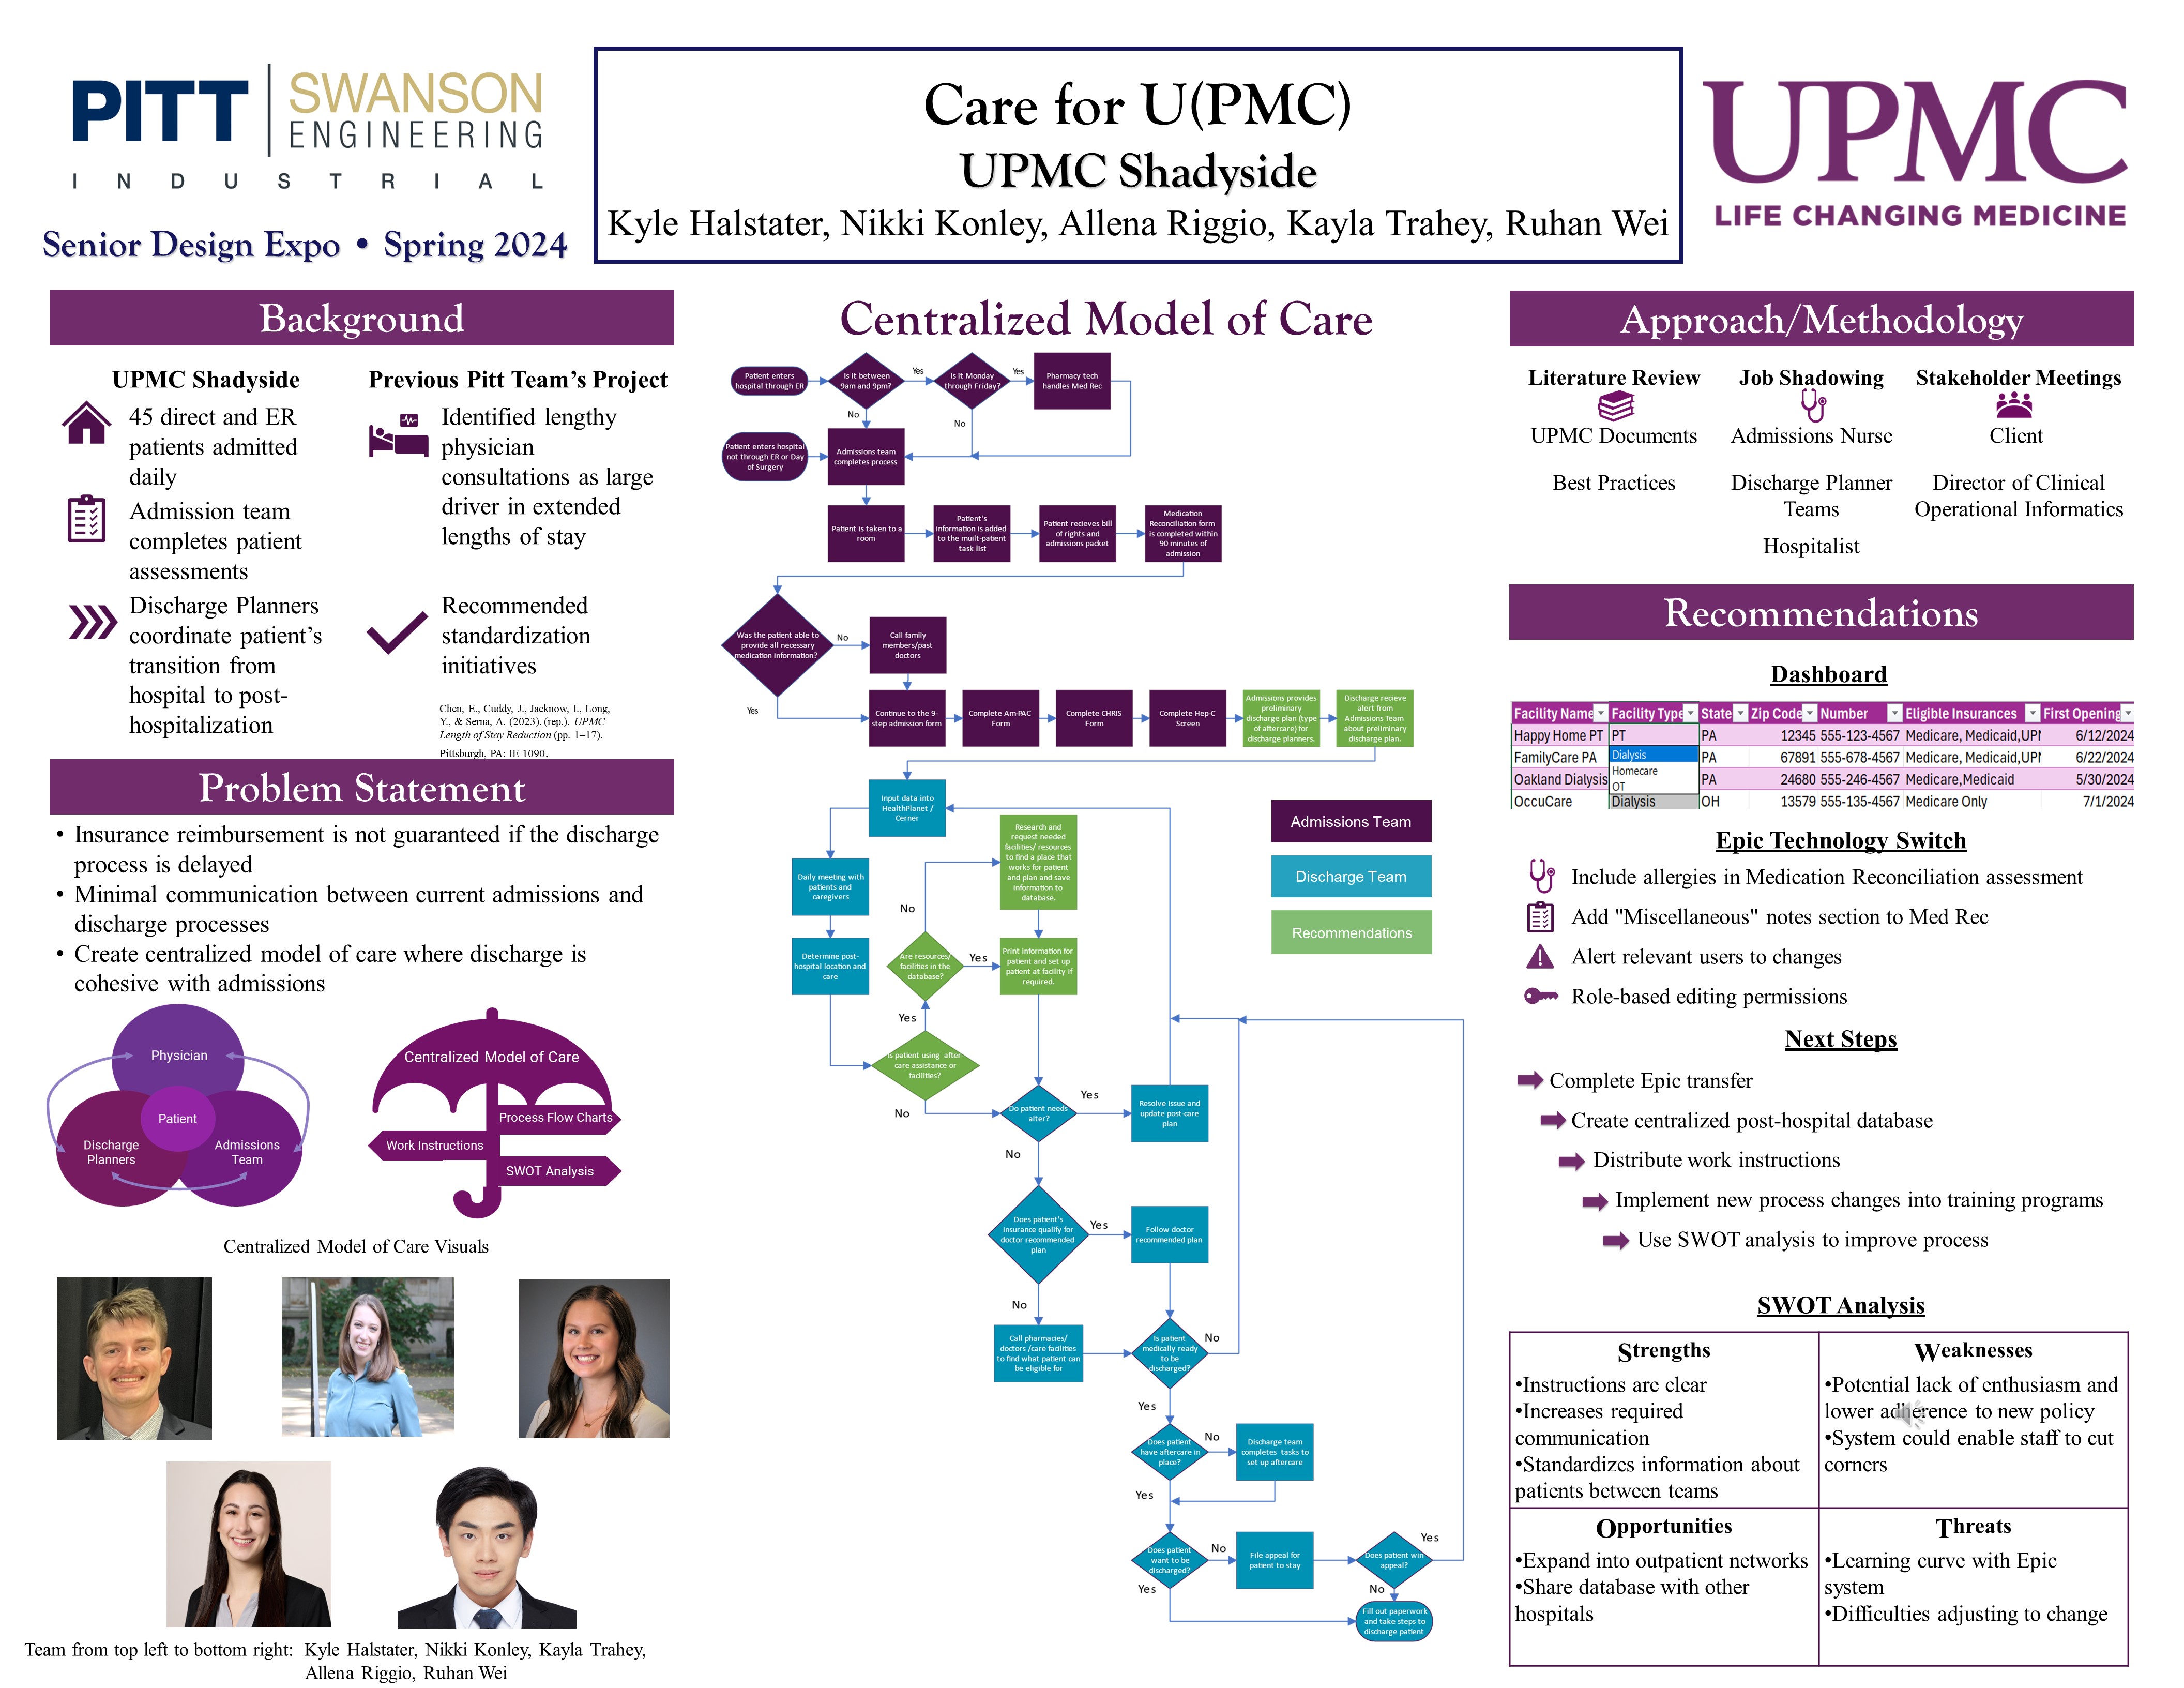 UPMC Shadyside, Care for U(PMC) research poster overview